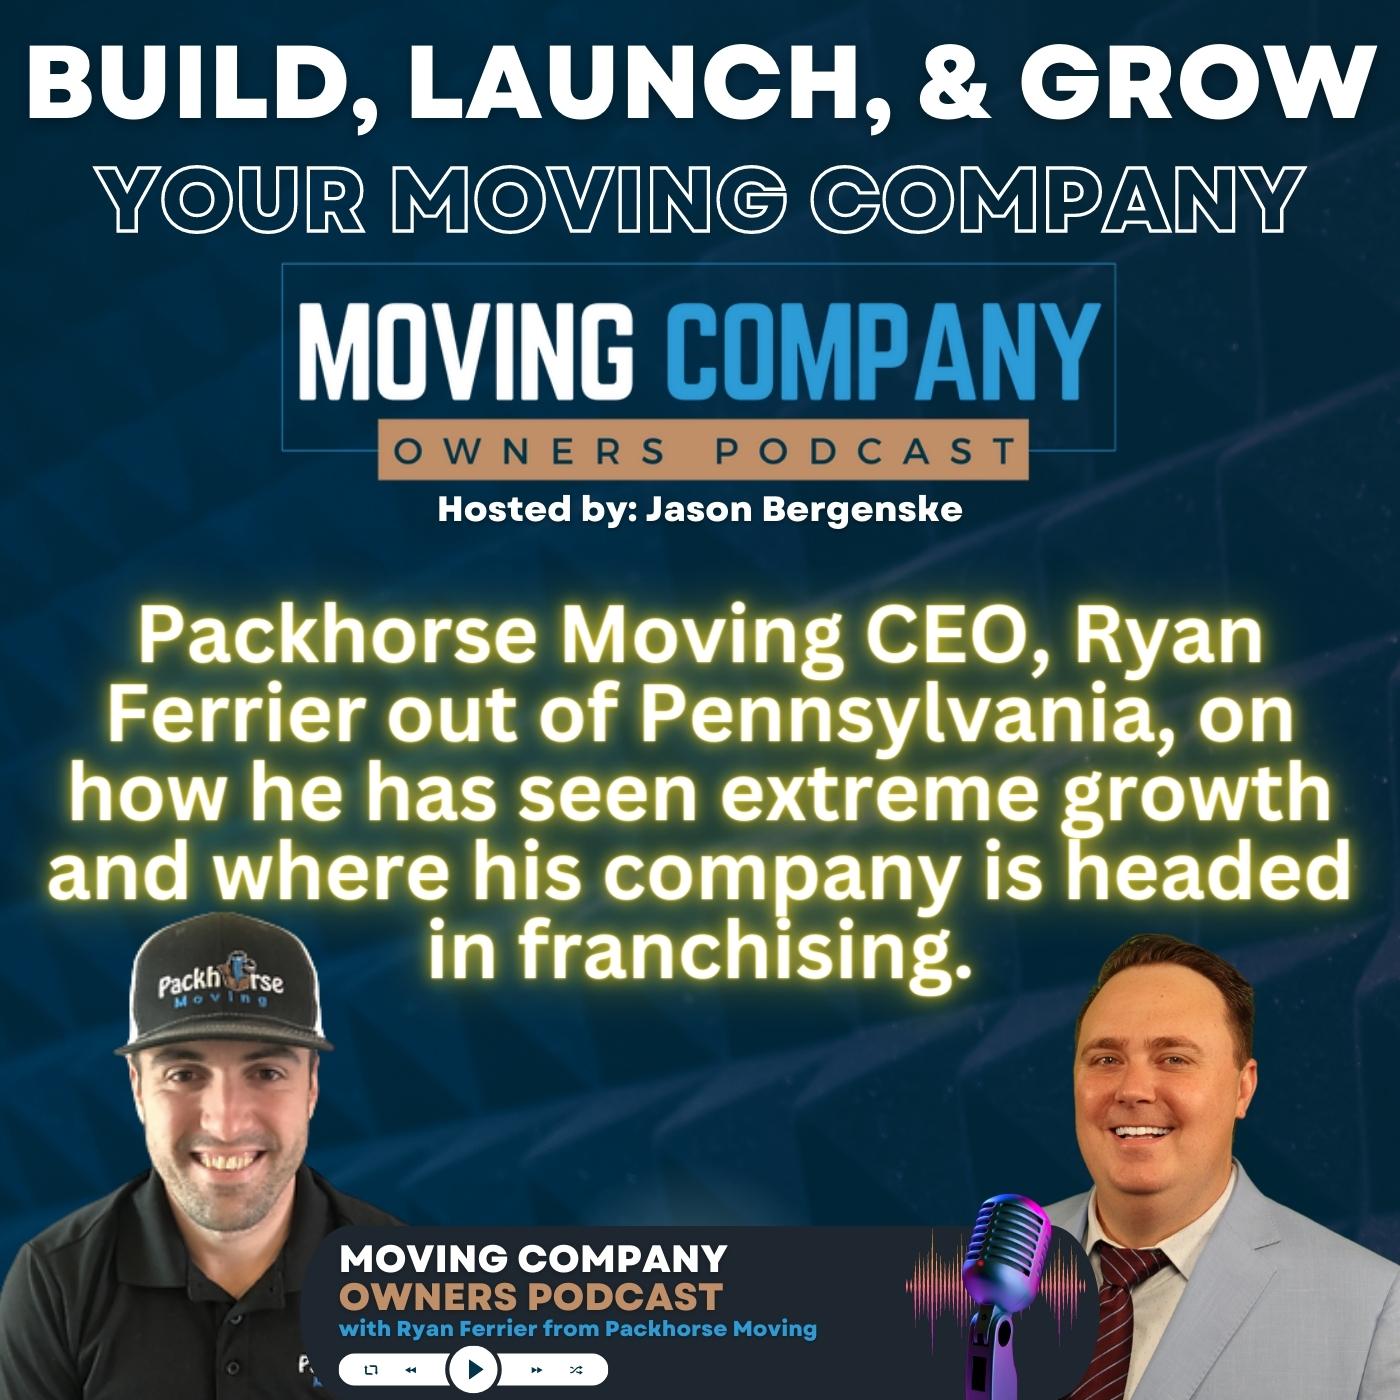 Packhorse Moving CEO, Ryan Ferrier out of Pennsylvania, on how he has seen extreme growth